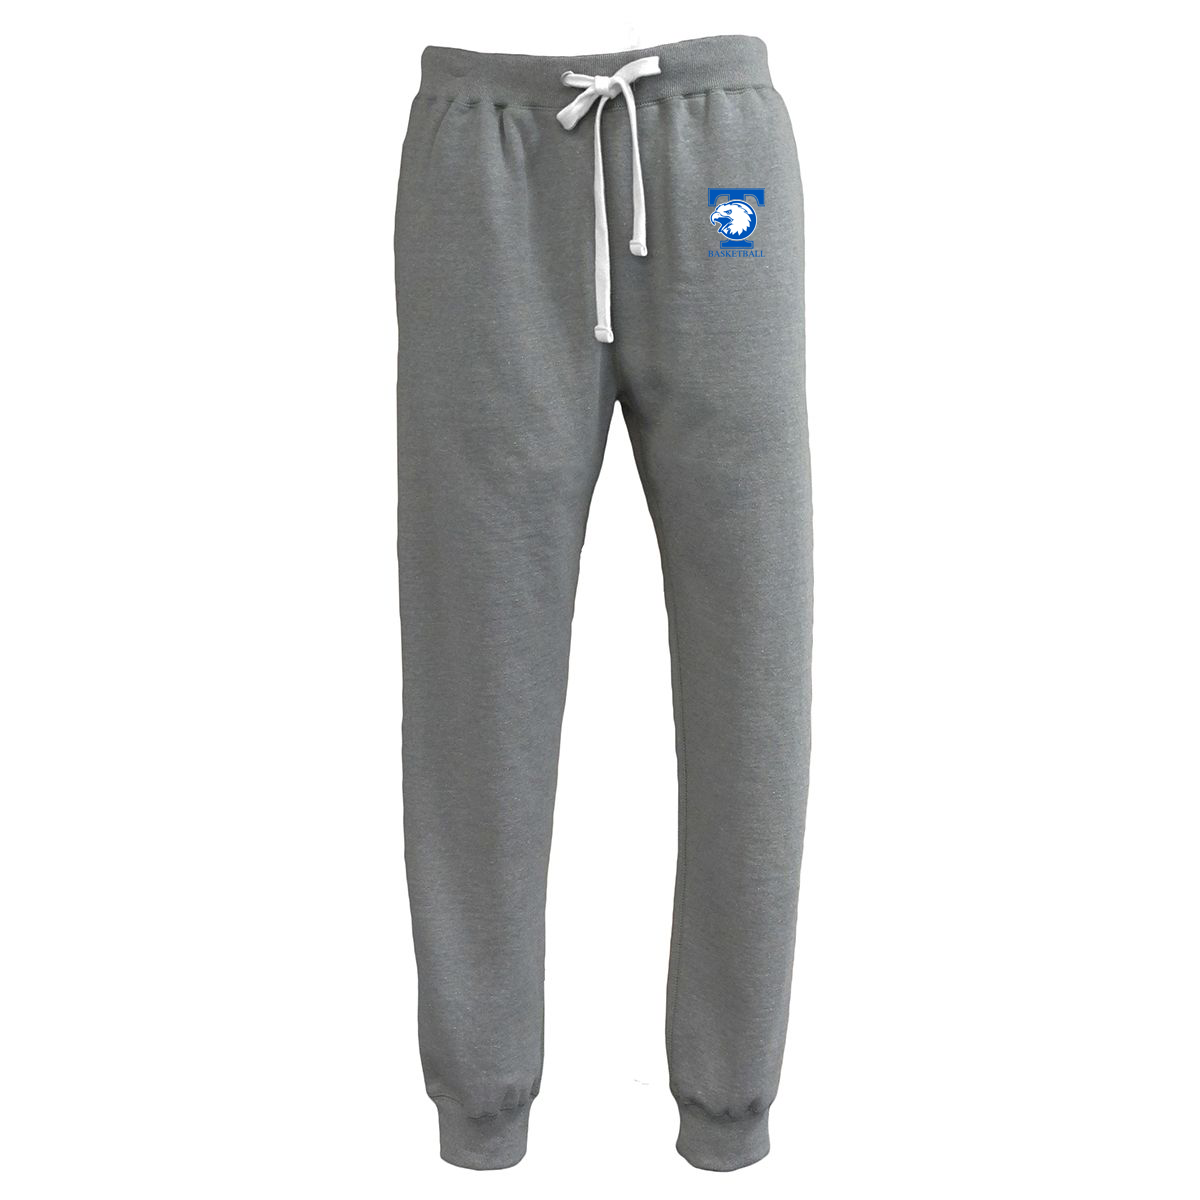 Tolland Travel Basketball Joggers